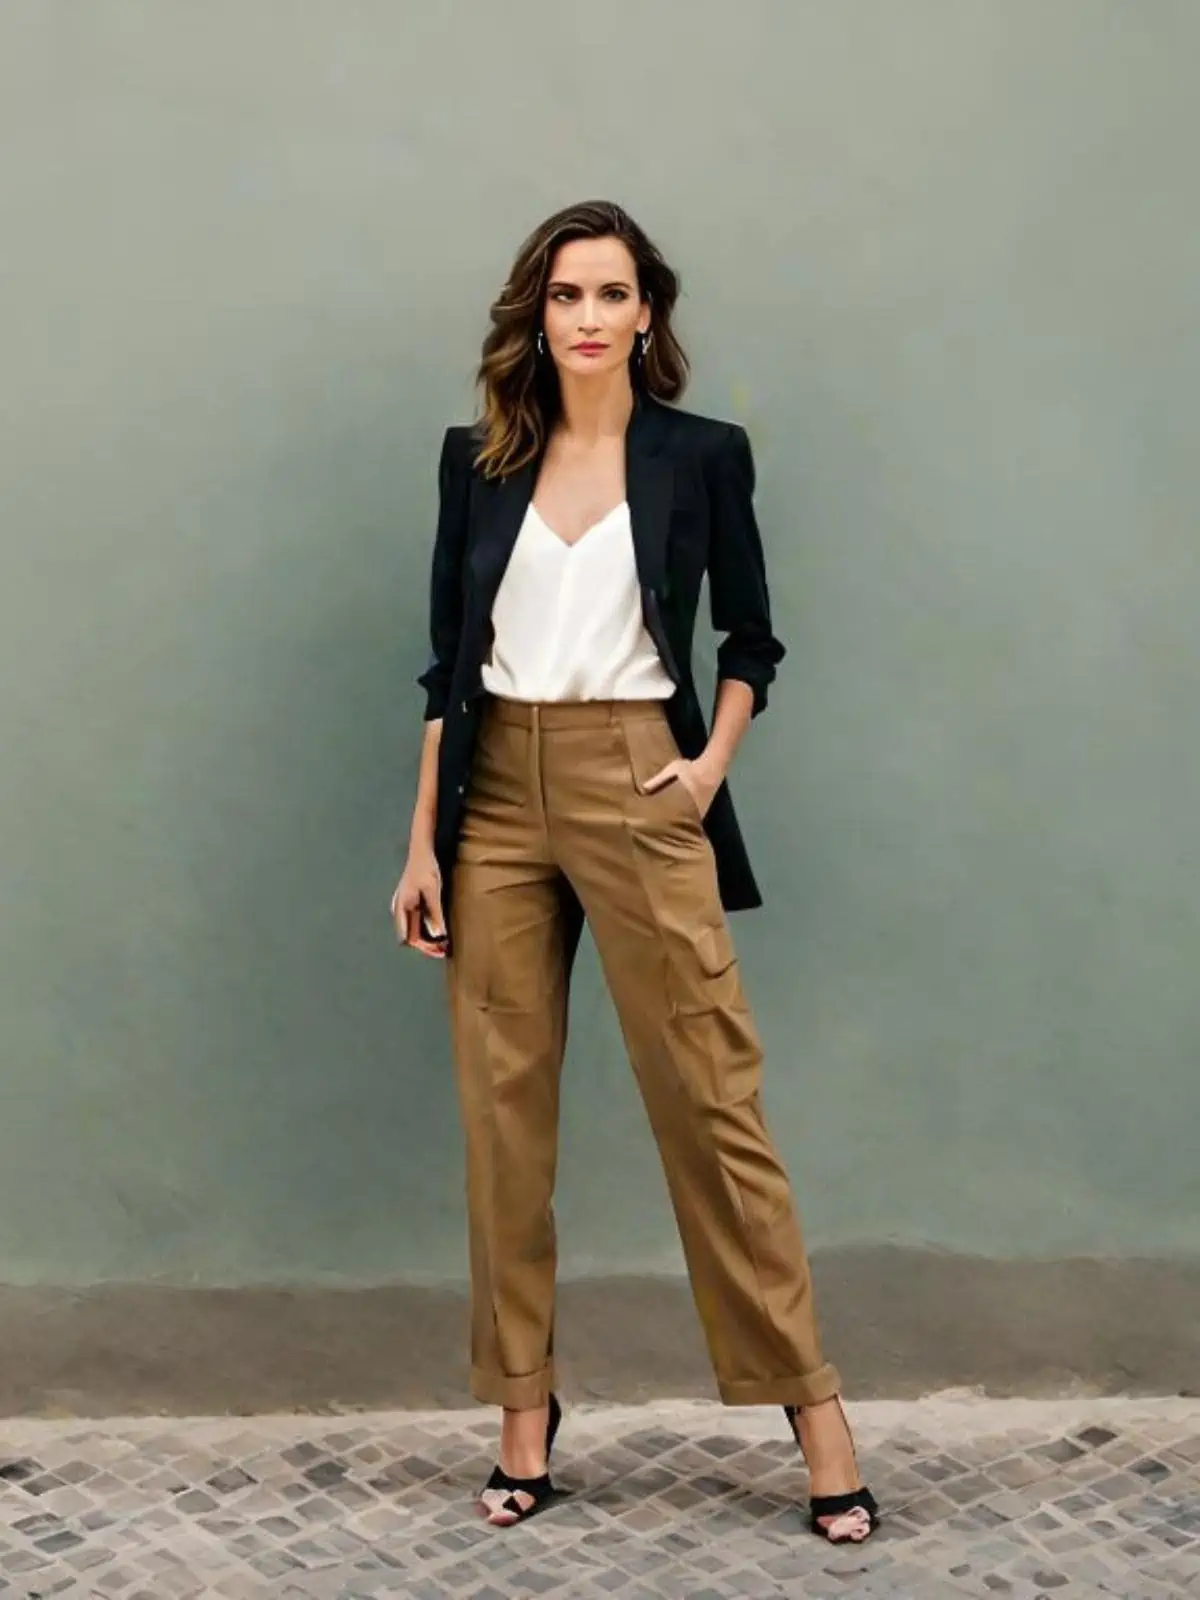 Premium Photo | A woman in a black shirt and brown pants stands in front of  a white background.